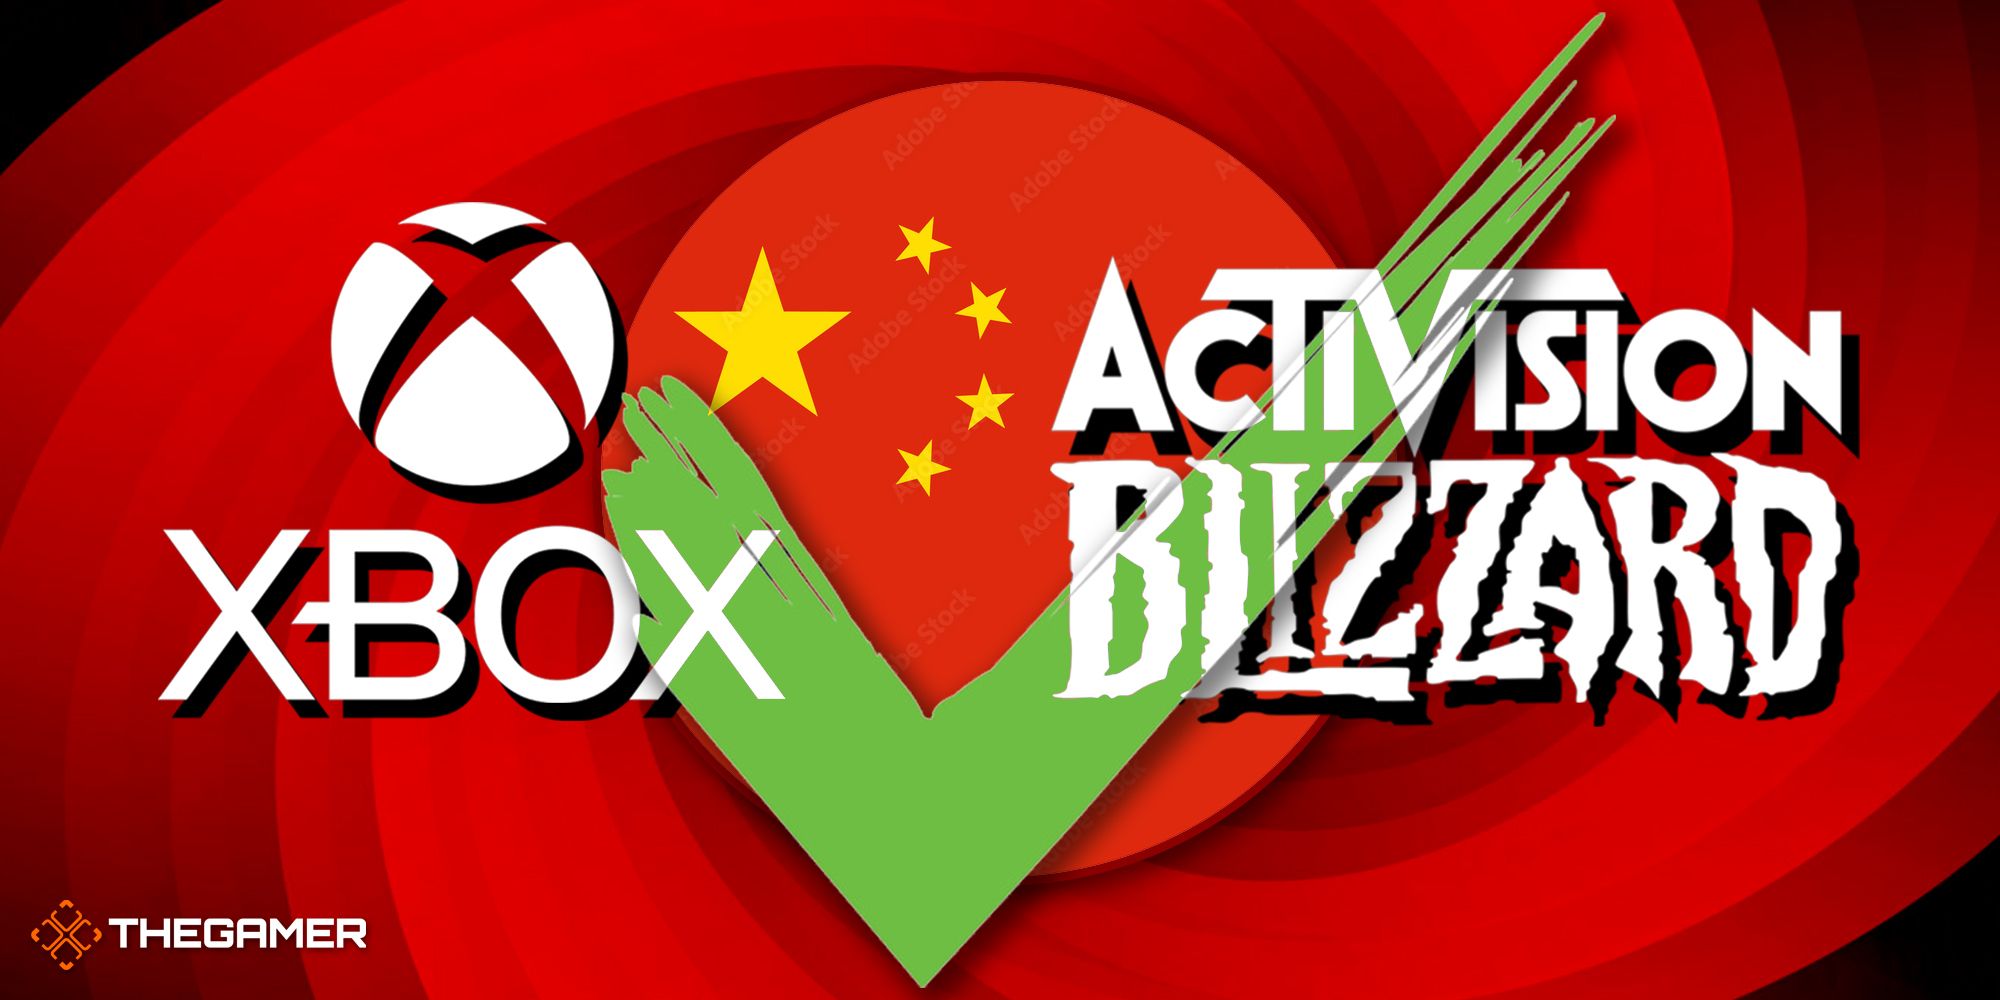 Microsoft's Merger with Activision-Blizzard Will Probably Be Approved 